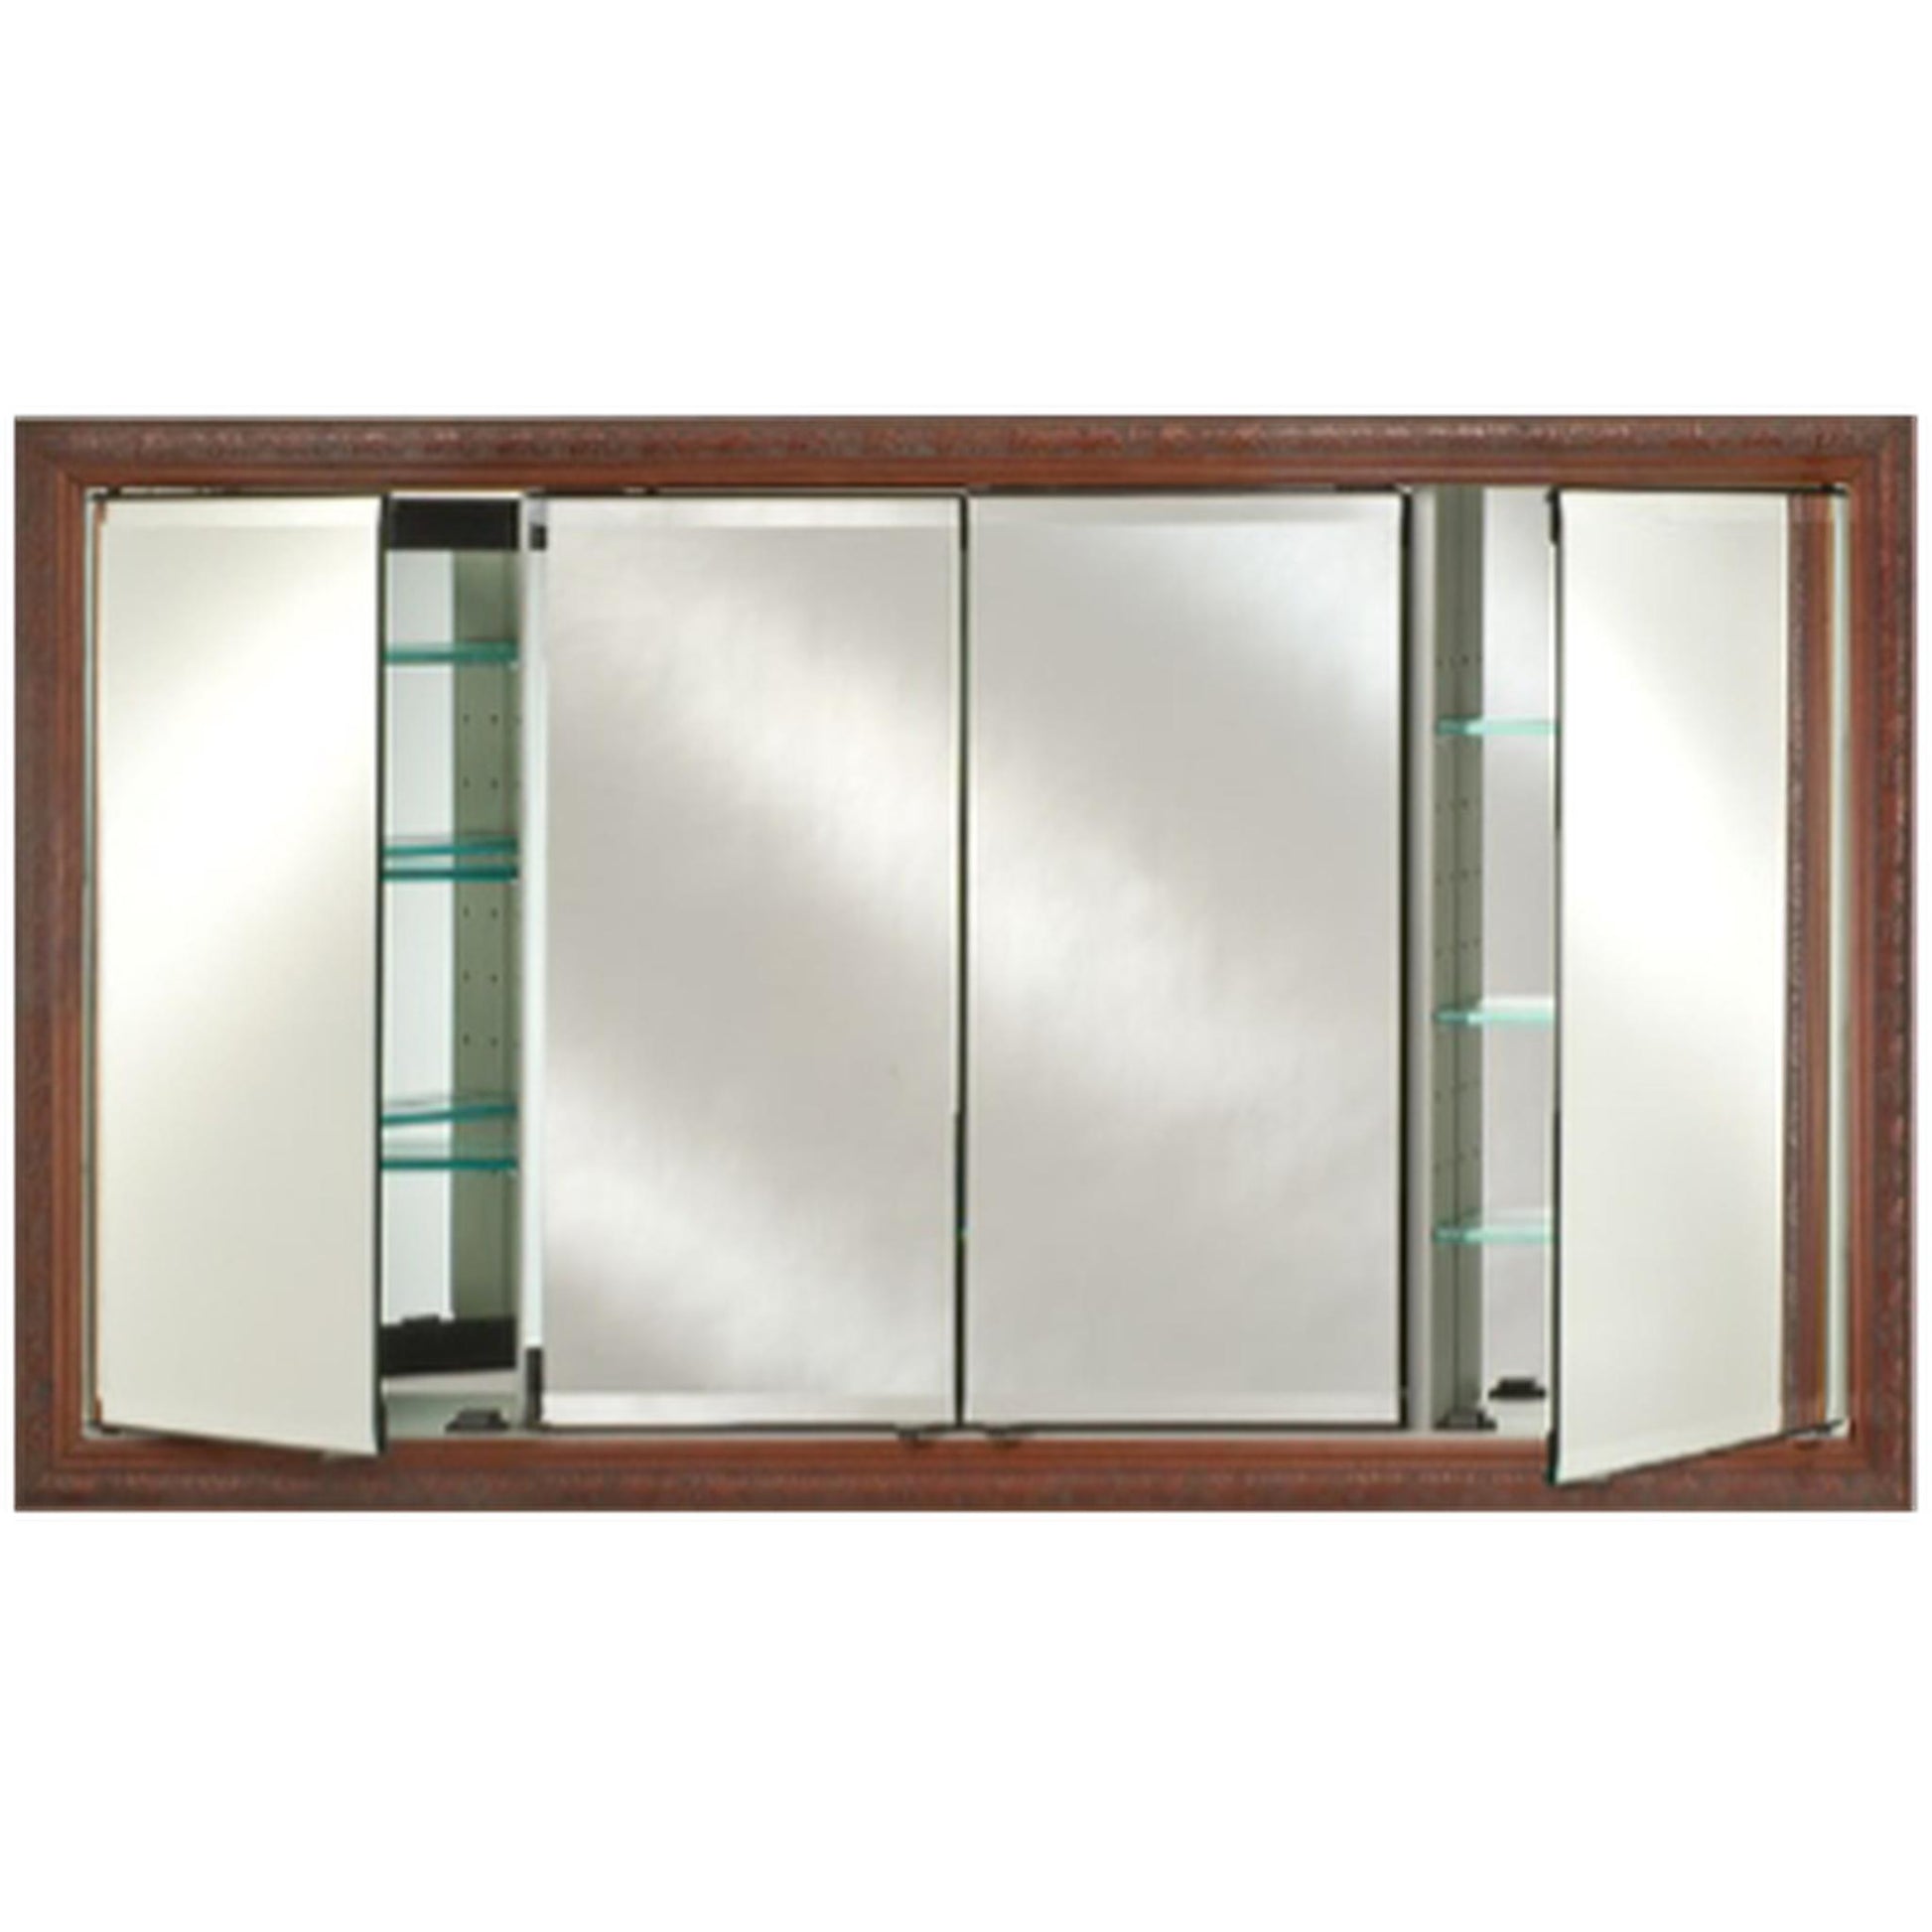 Afina Signature 63" x 36" Polished Glimmer-Flat Recessed Four Door Medicine Cabinet With Beveled Edge Mirror